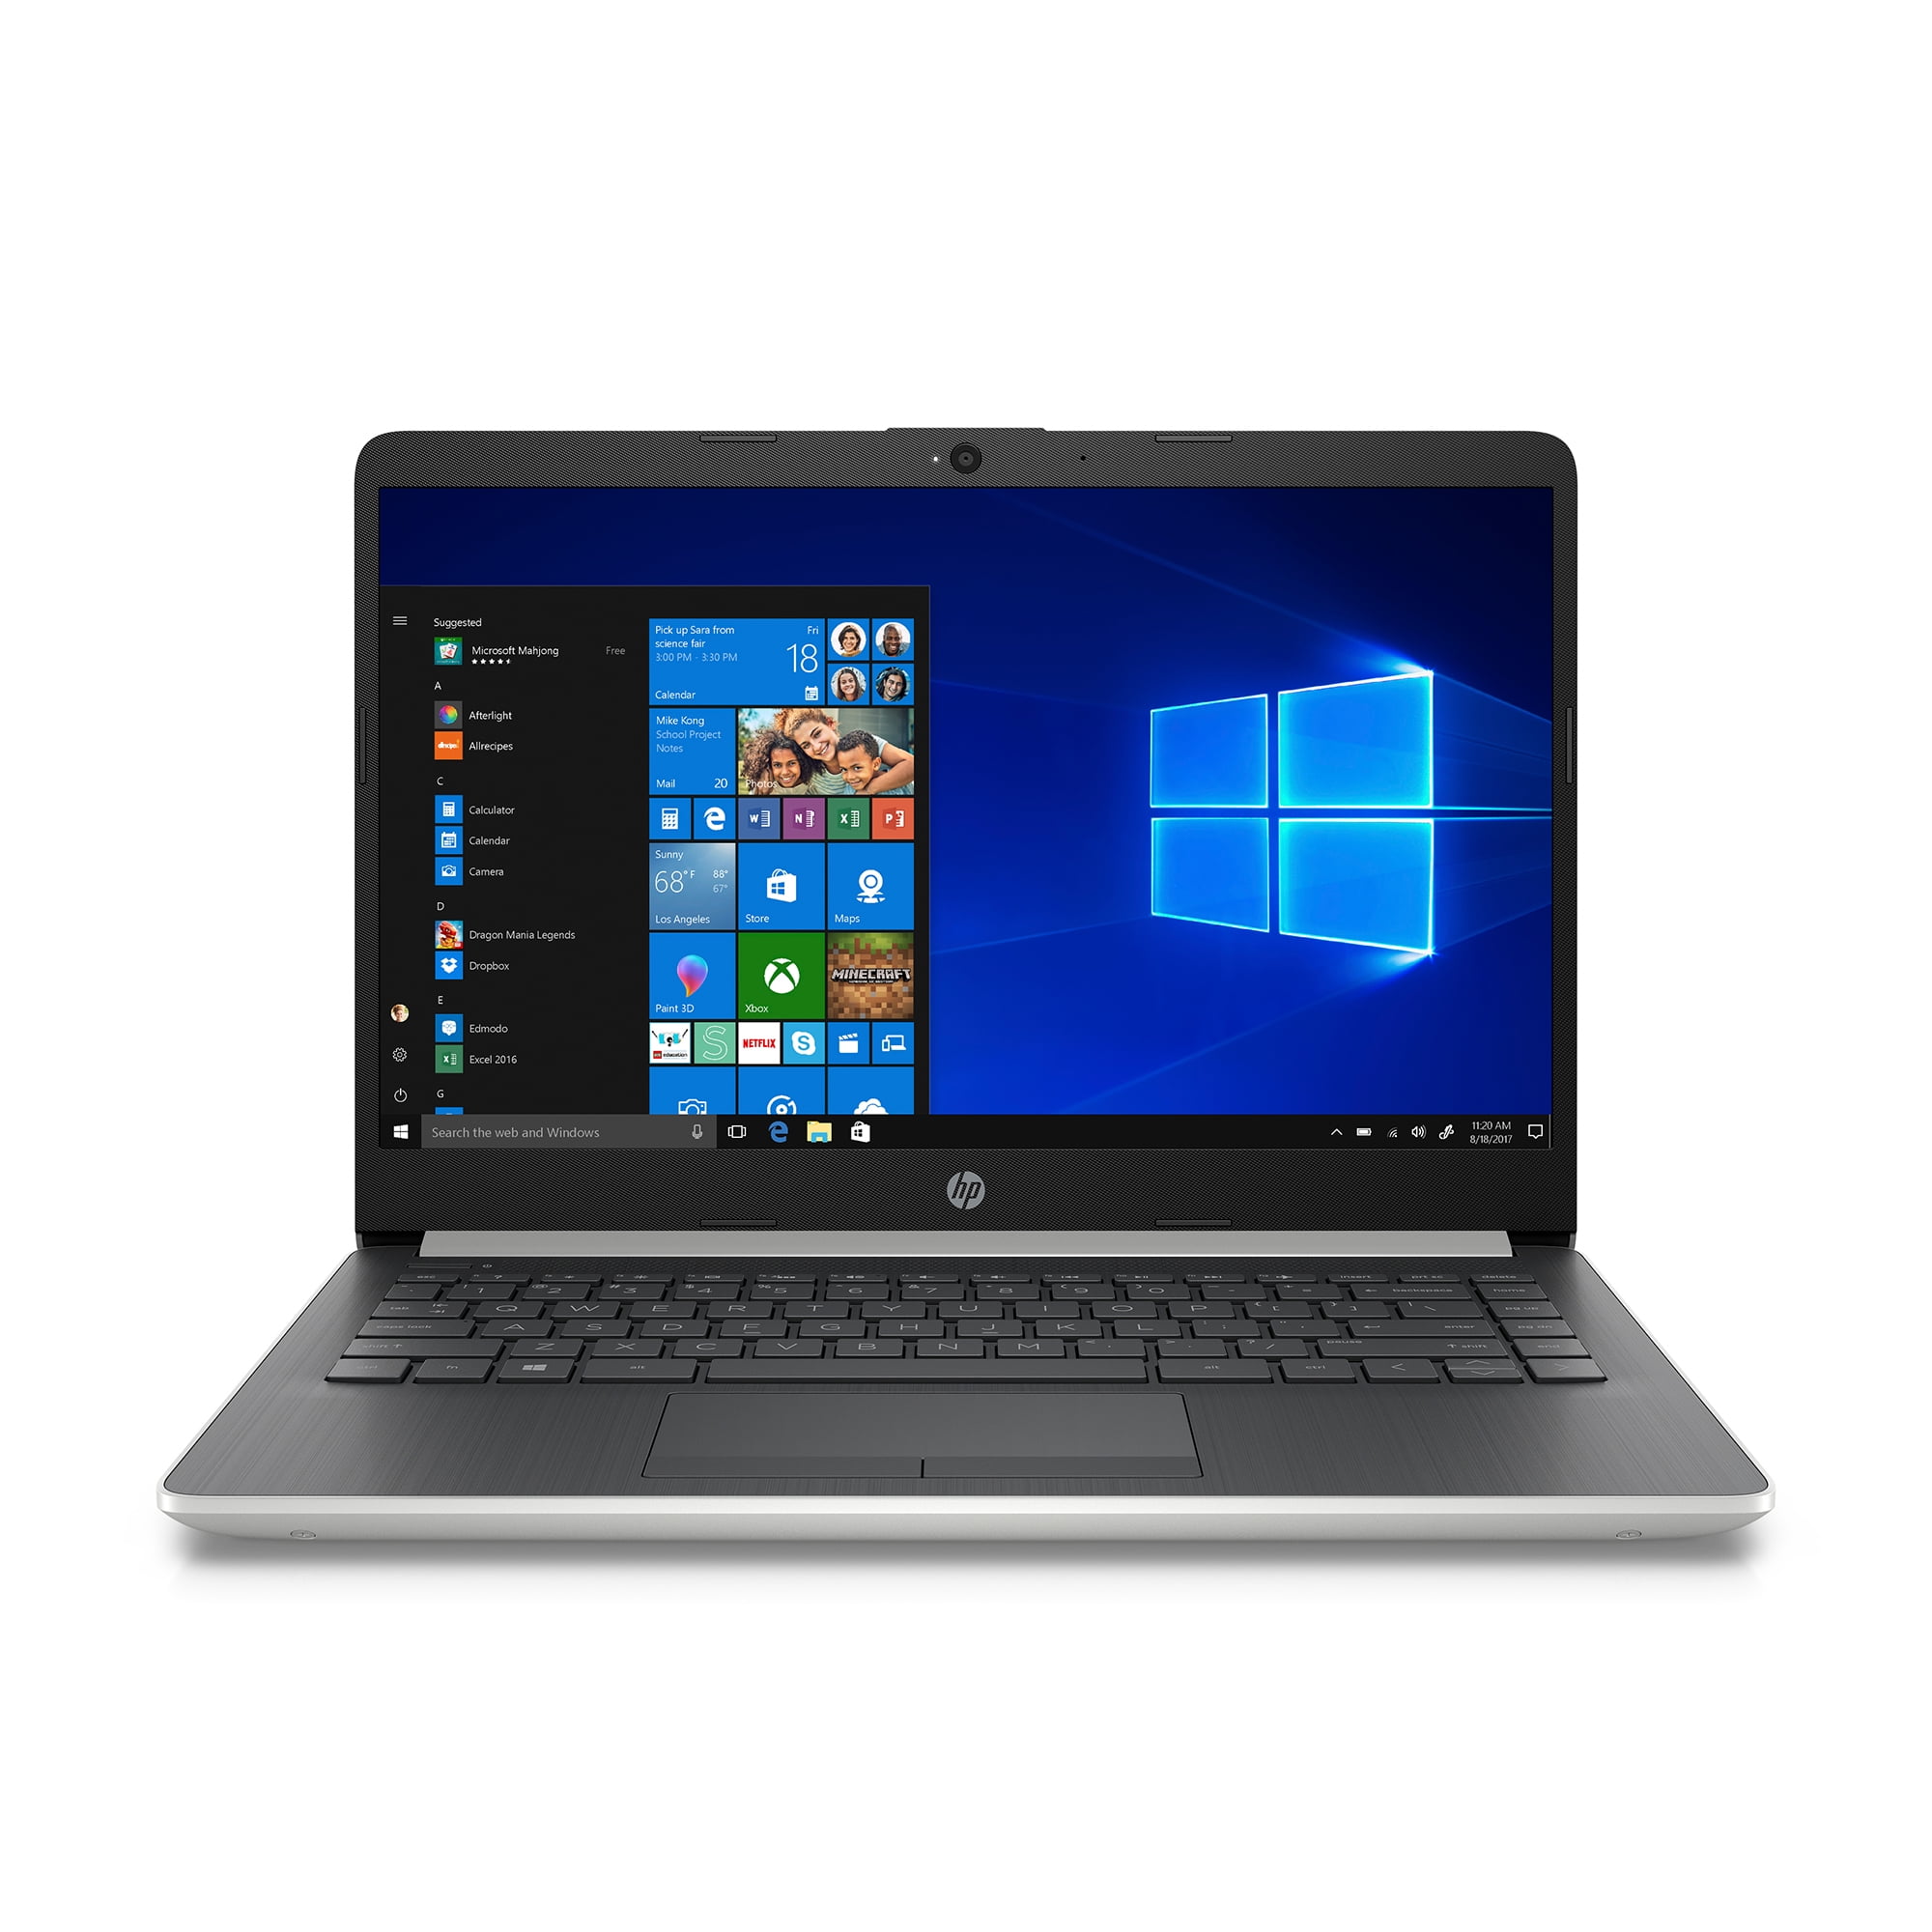 HP 14 Laptop, Intel Celeron N4000, 4GB SDRAM, 64GB eMMC, Office 365  Personal 1-year (A $70 value included for free), Natural Silver